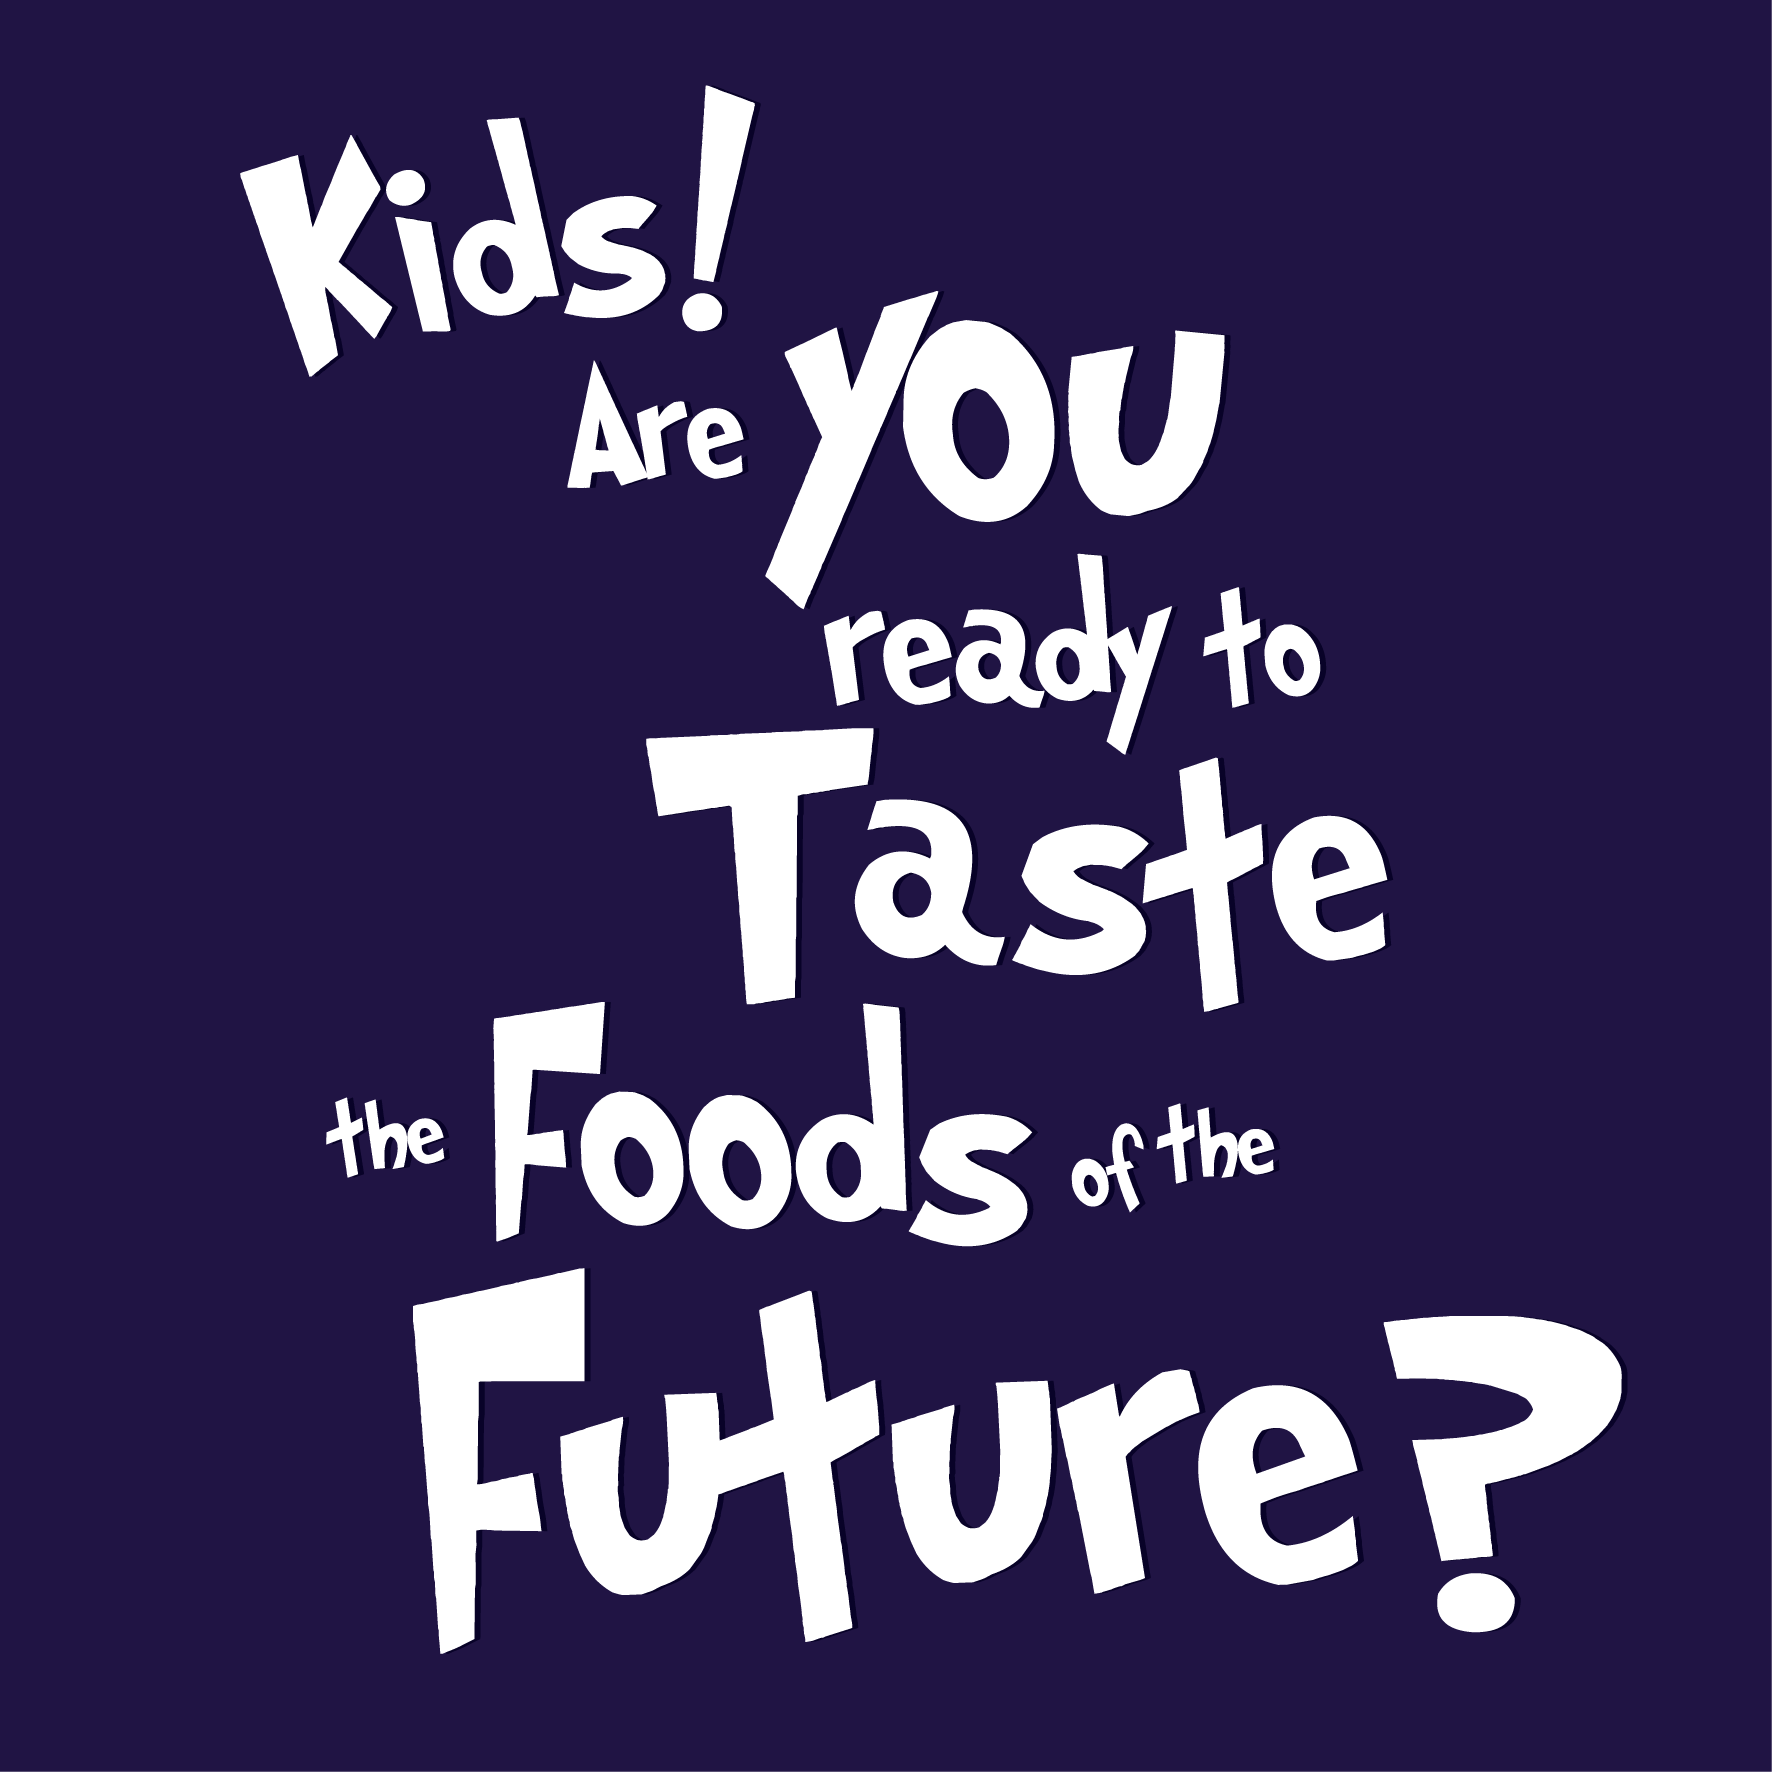 Kids are you ready to taste the foods of the future?